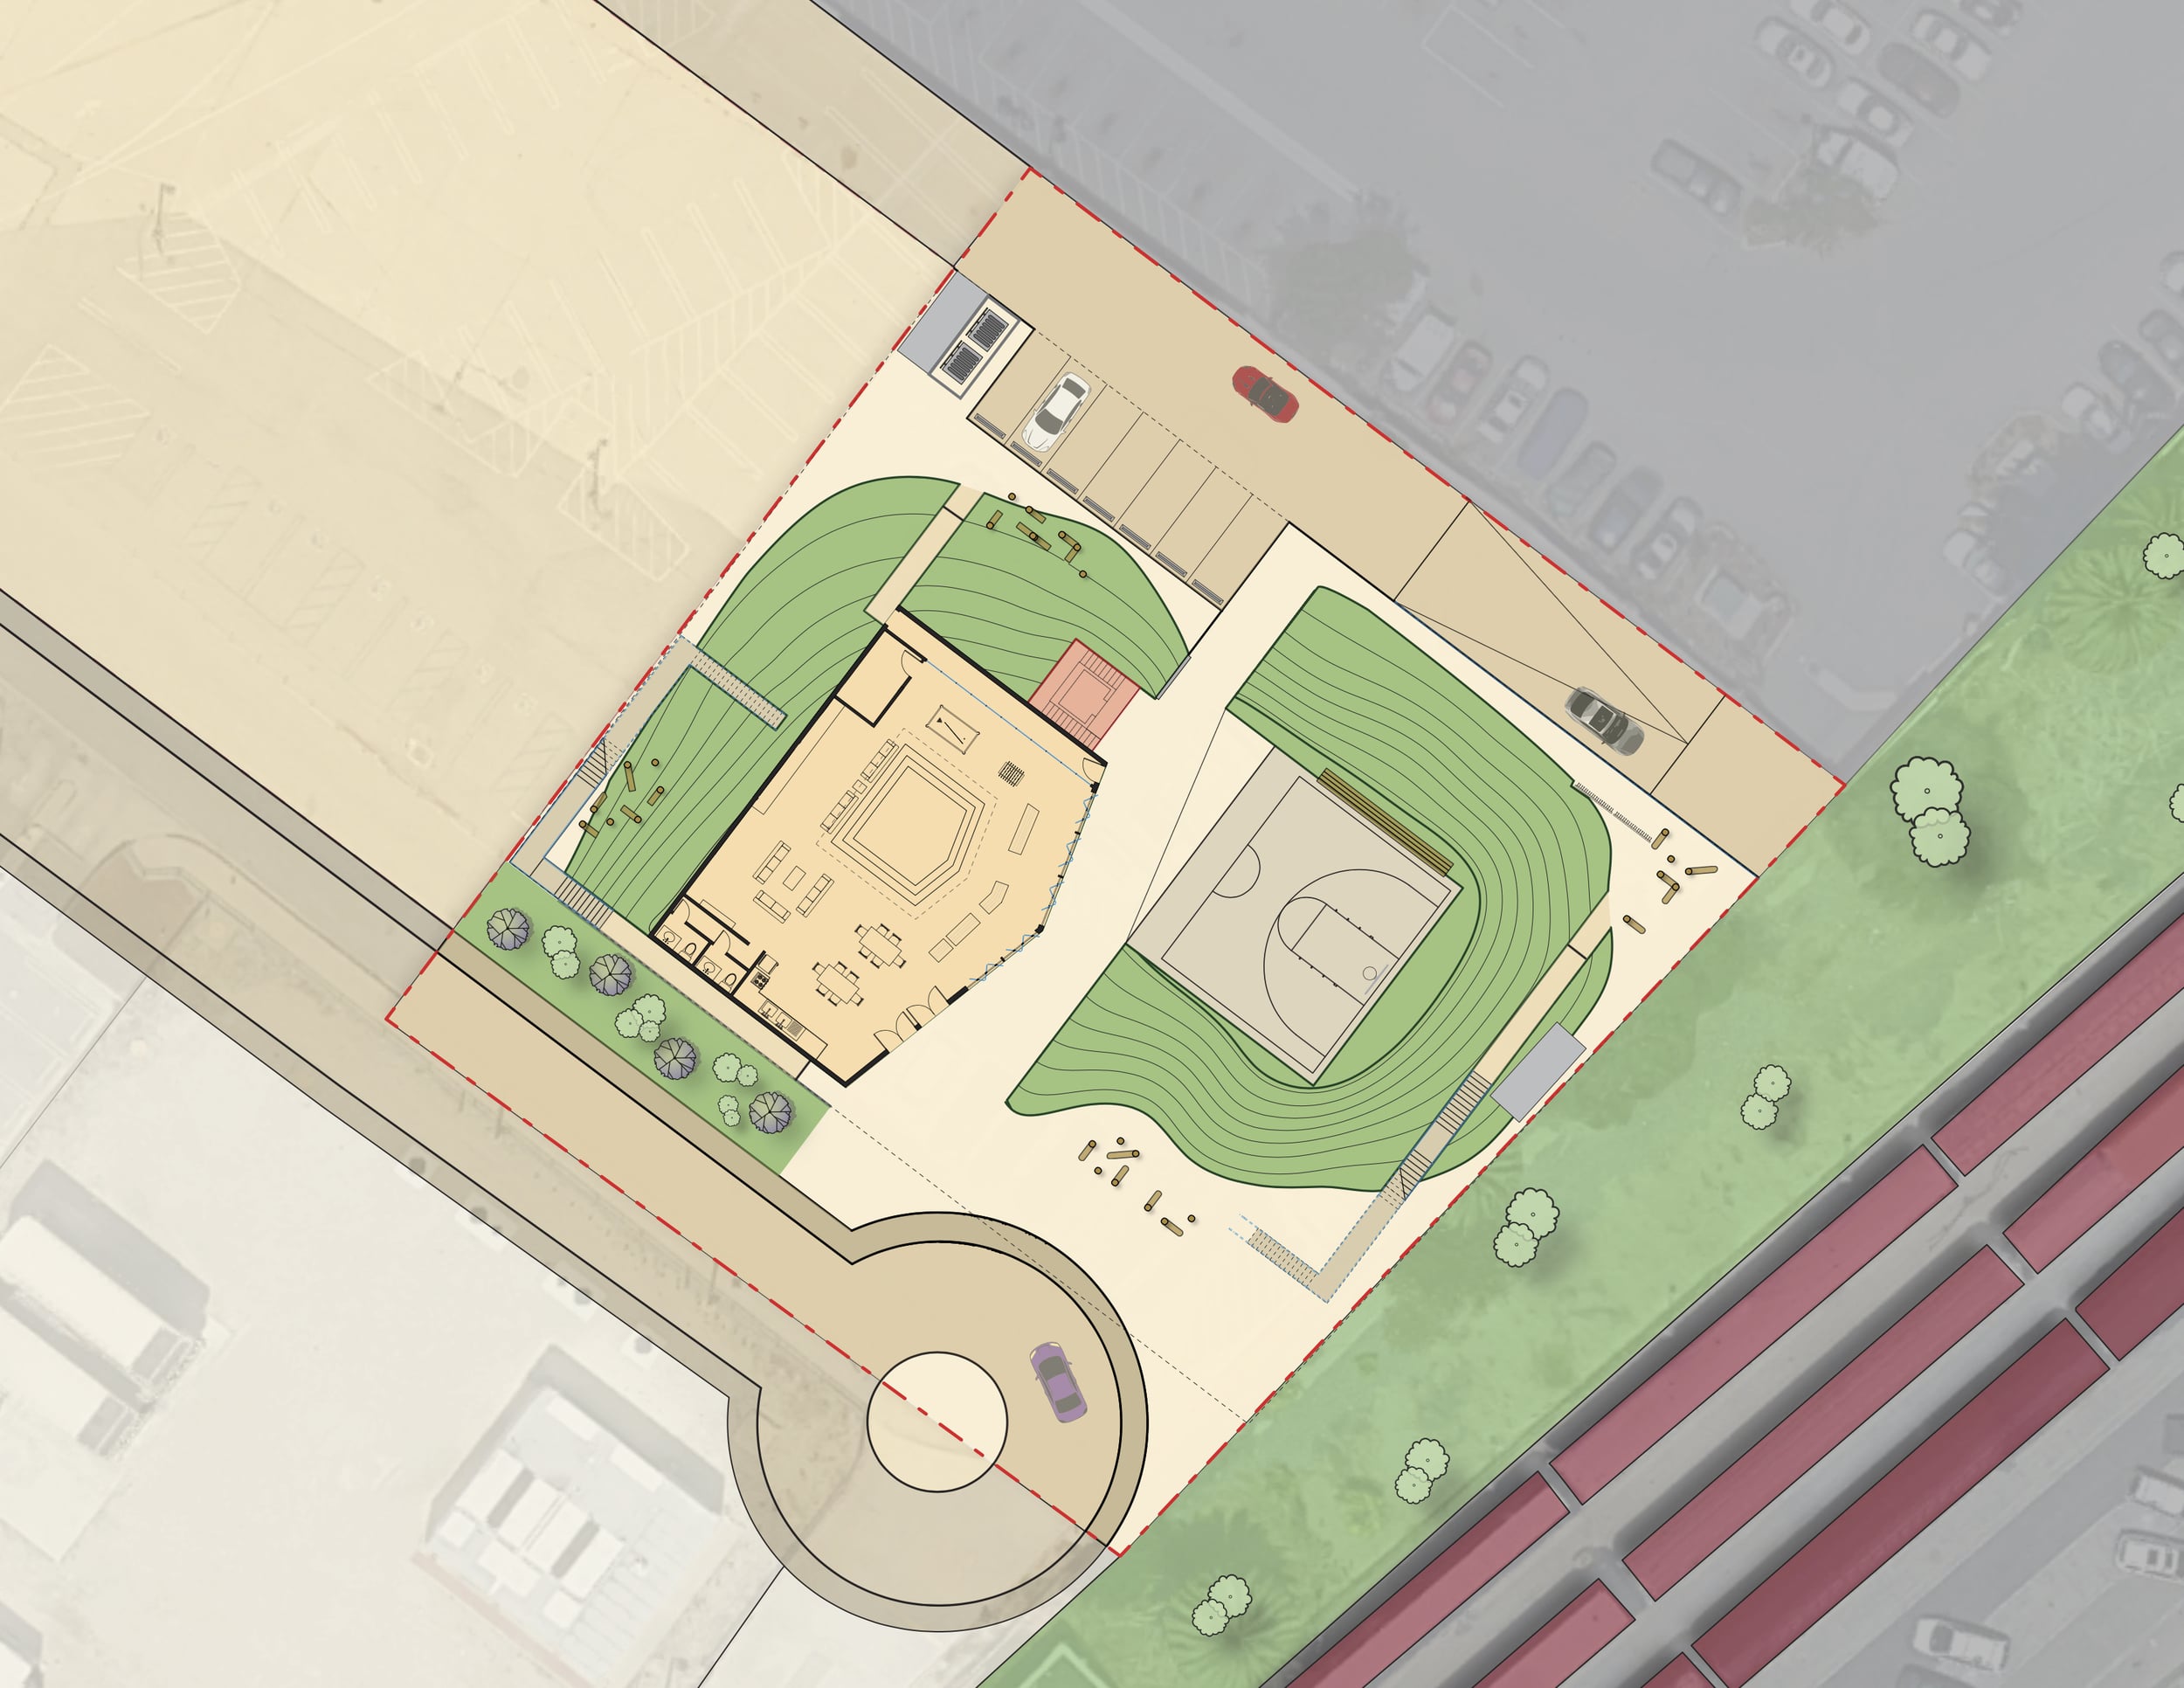  Site plan (site access and community designated space) 